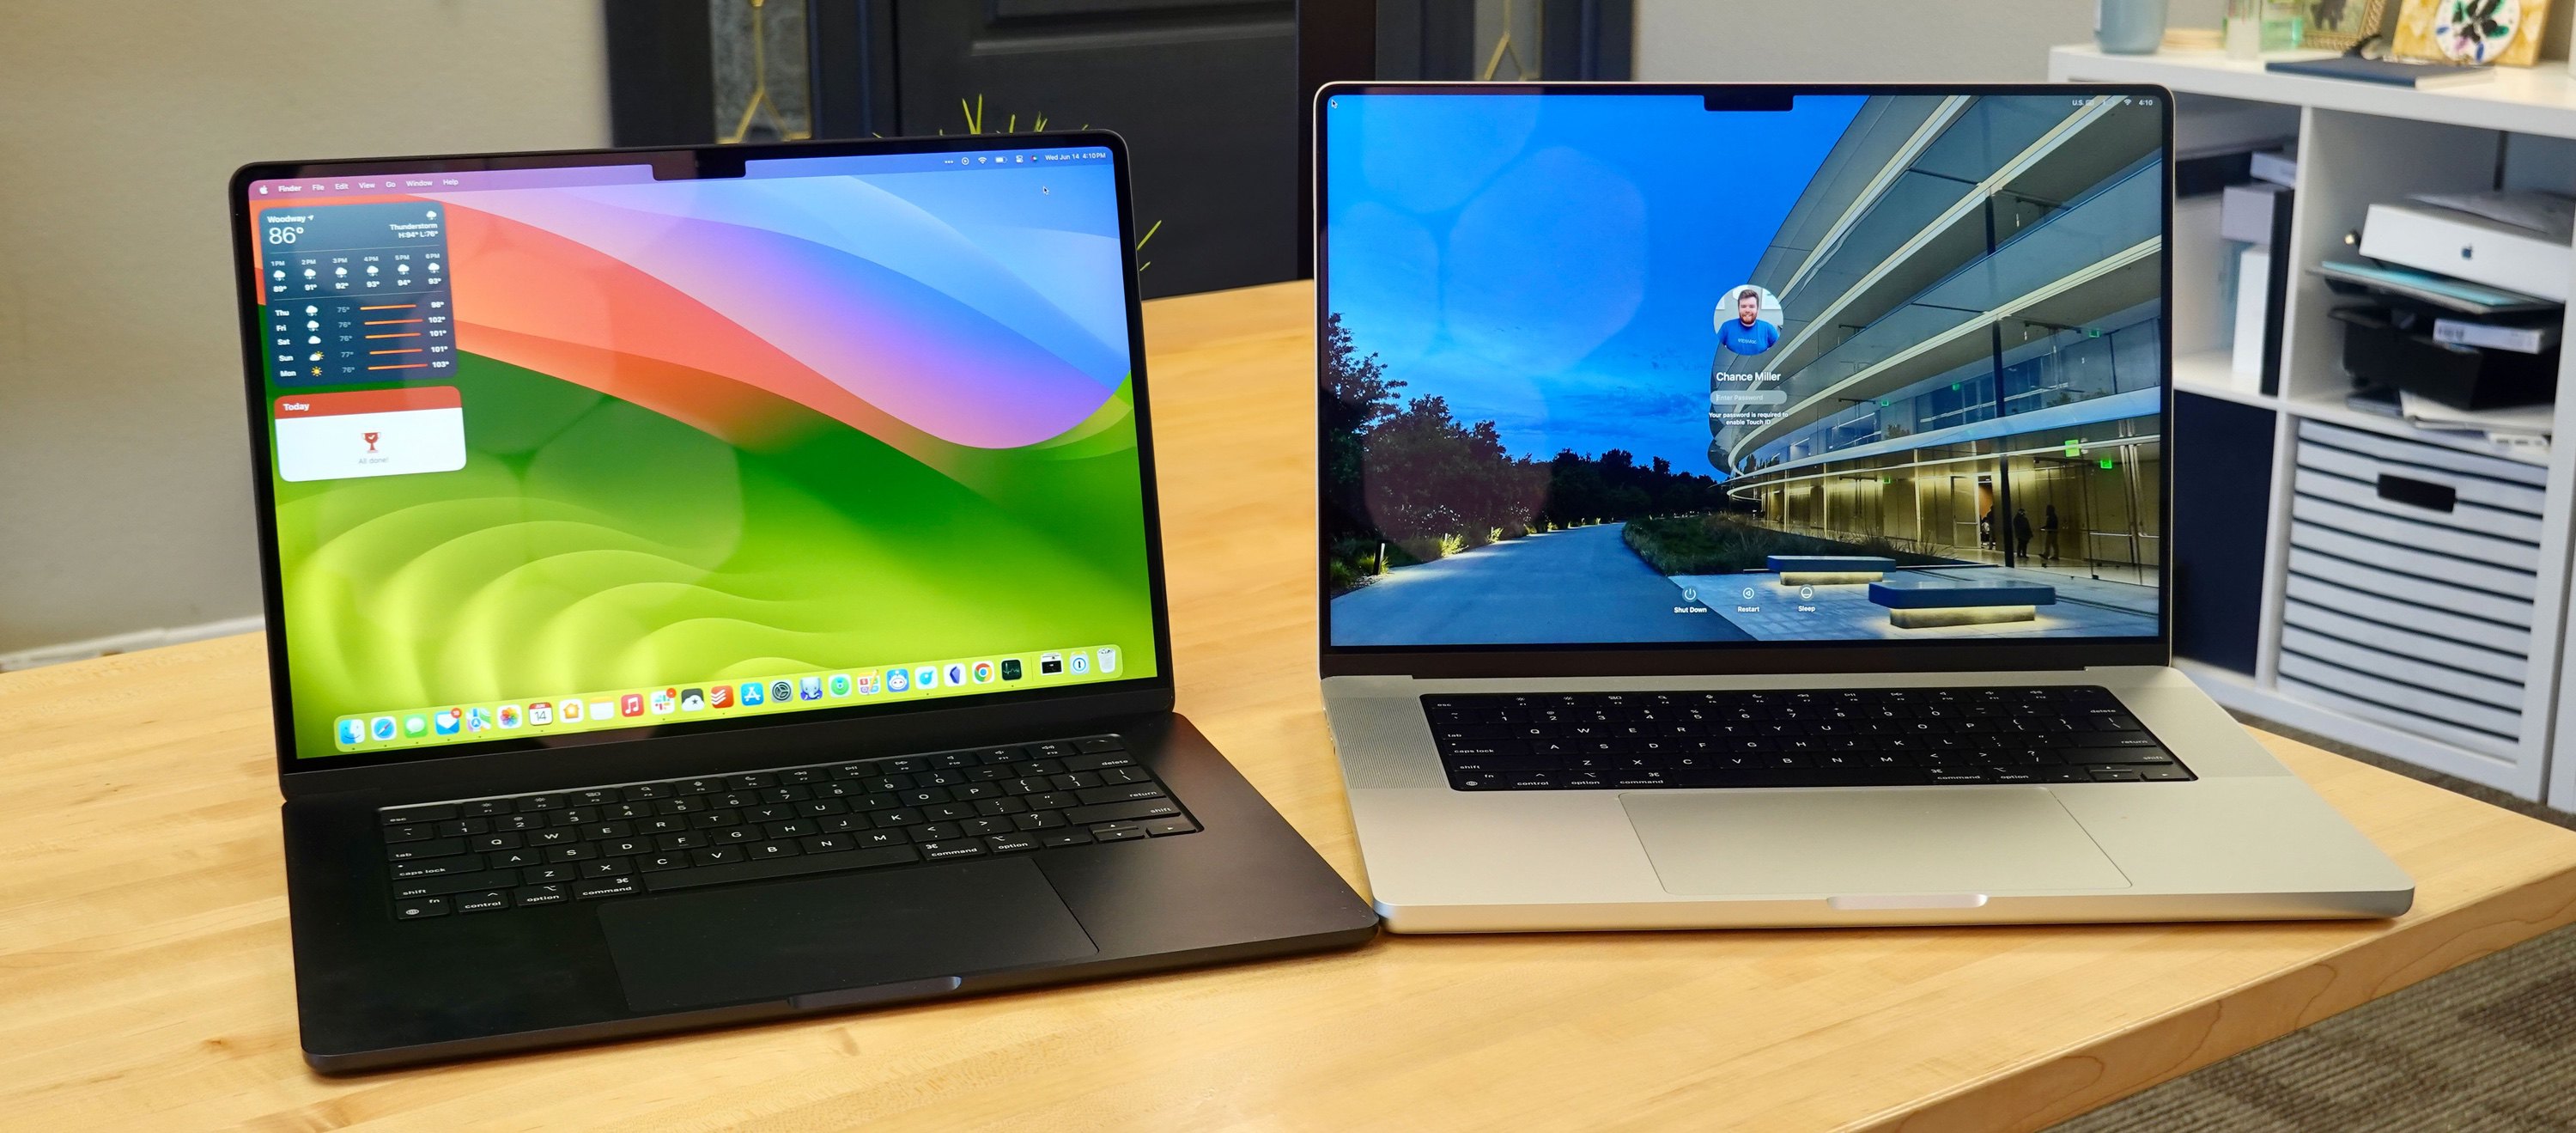 15-inch MacBook Air hands-on: Just what some folks were asking for